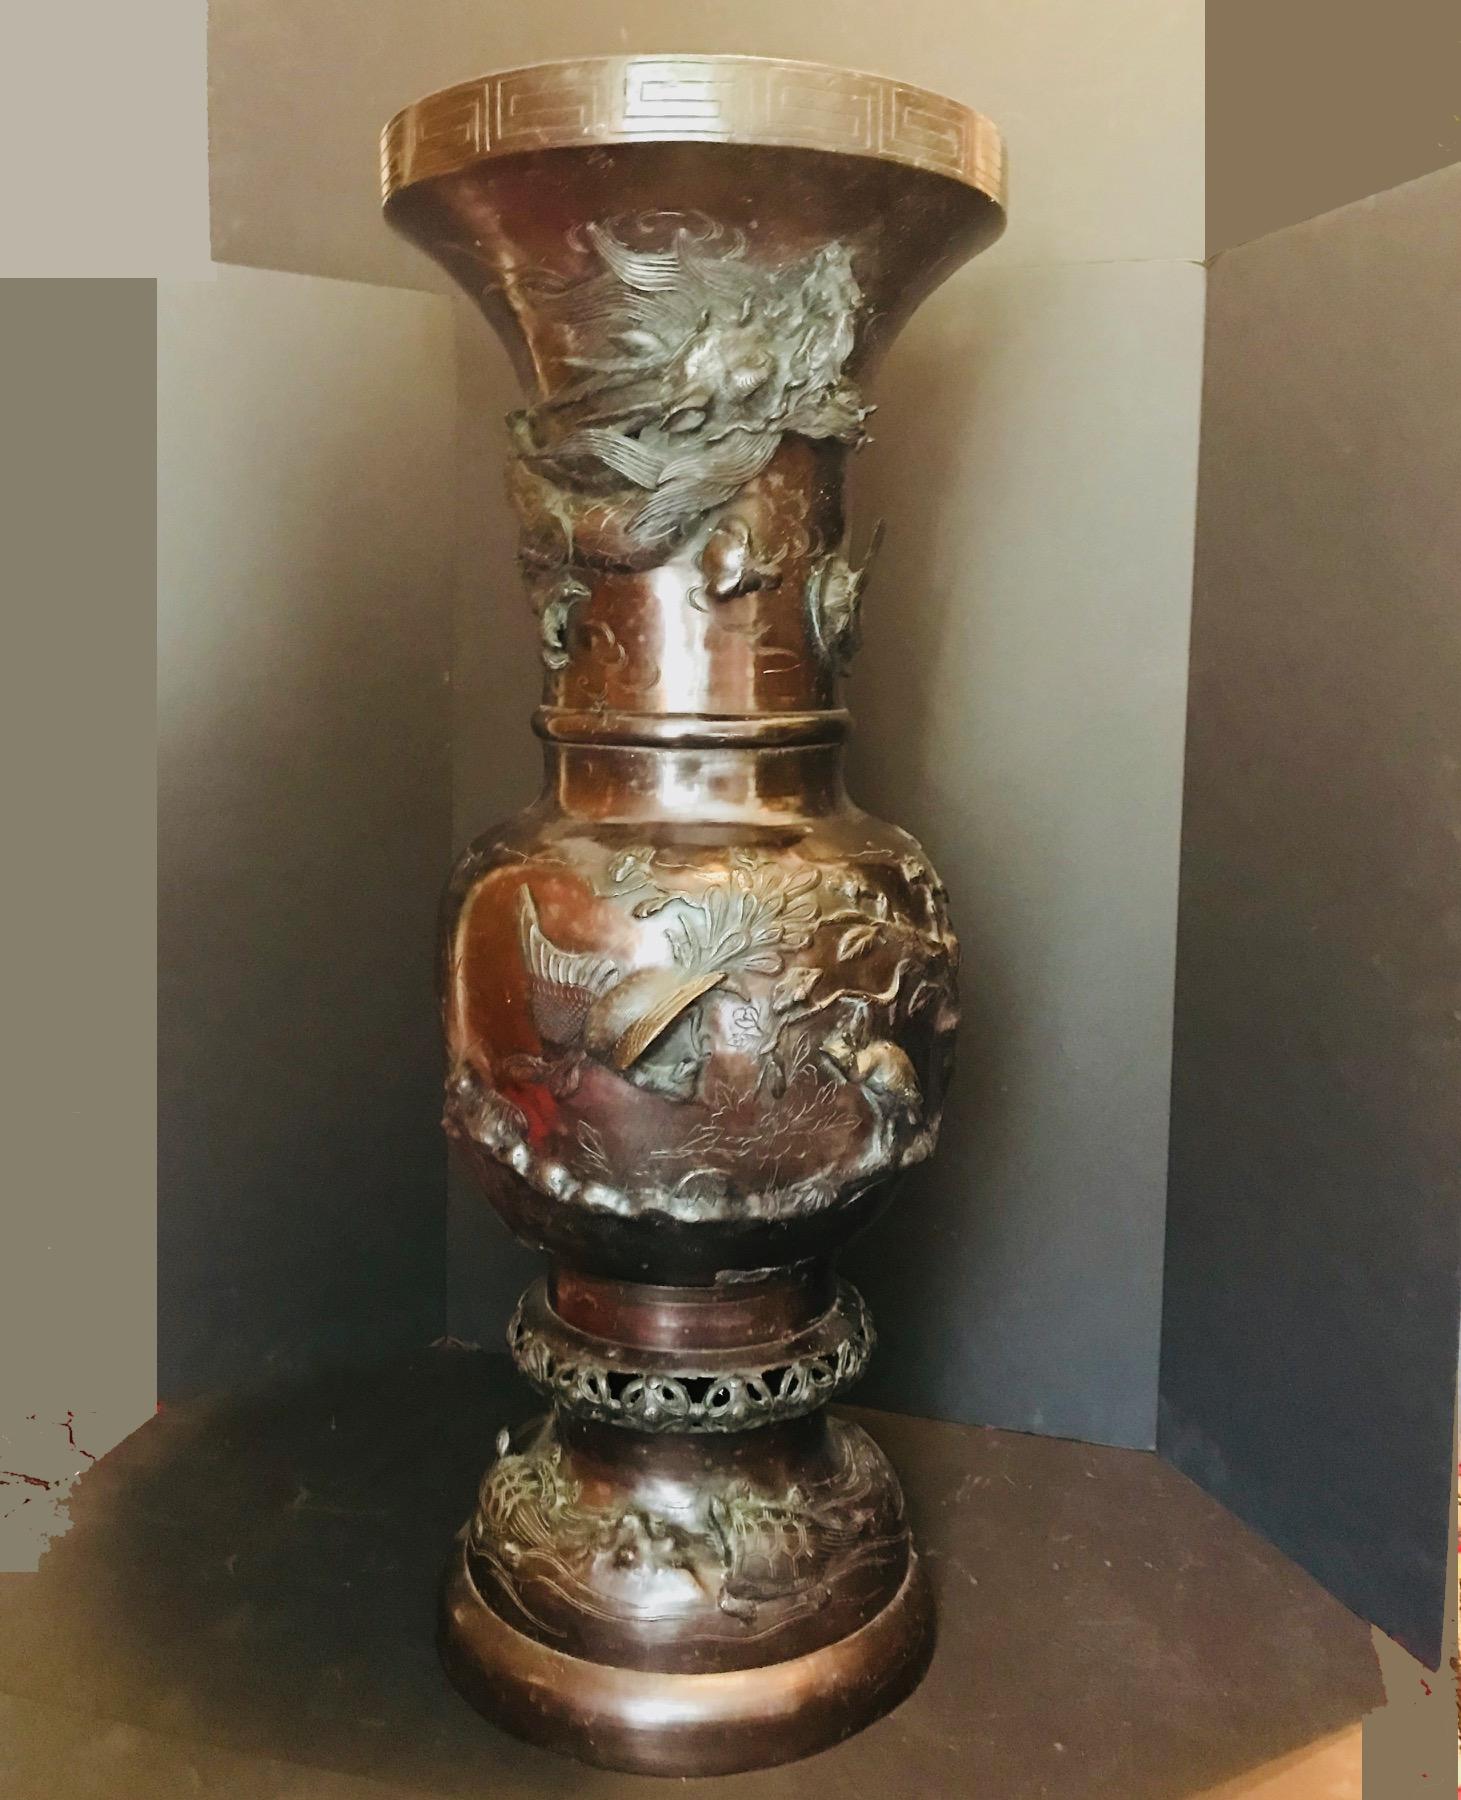 This is a stunning Japanese bronze urn or vase with a highly raised and heavy casted design throughout with figural creatures, cranes and turtles. The fine details are magnificent. This piece is in two sections and it has a rich brown bronze patina.